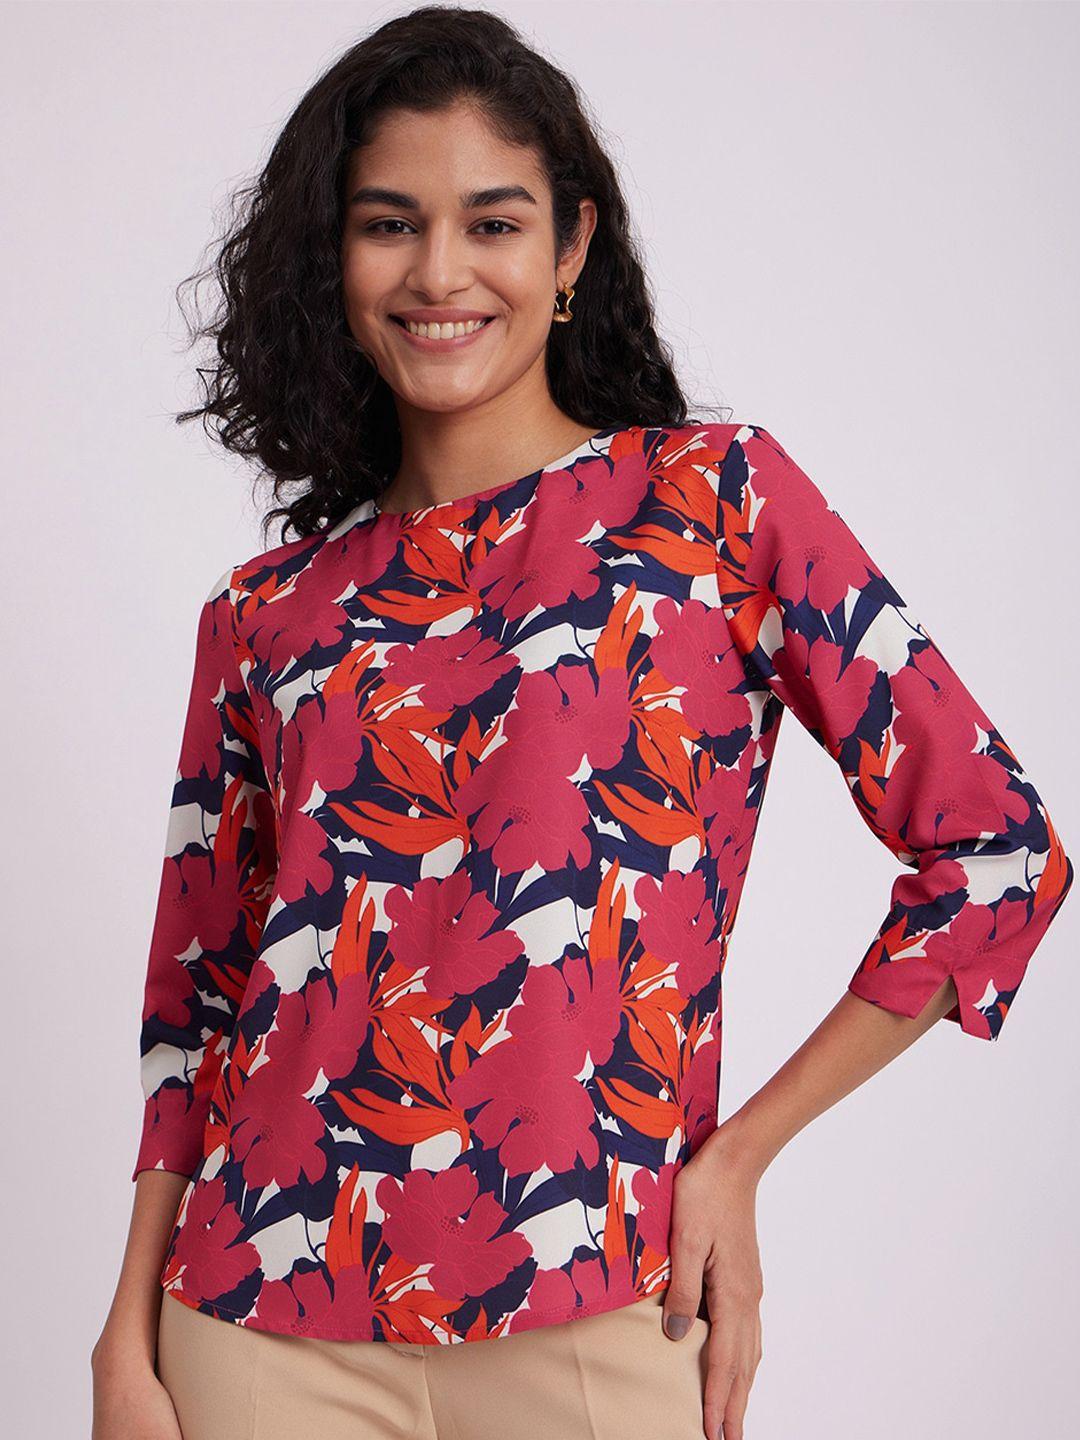 fablestreet fuchsia floral print top